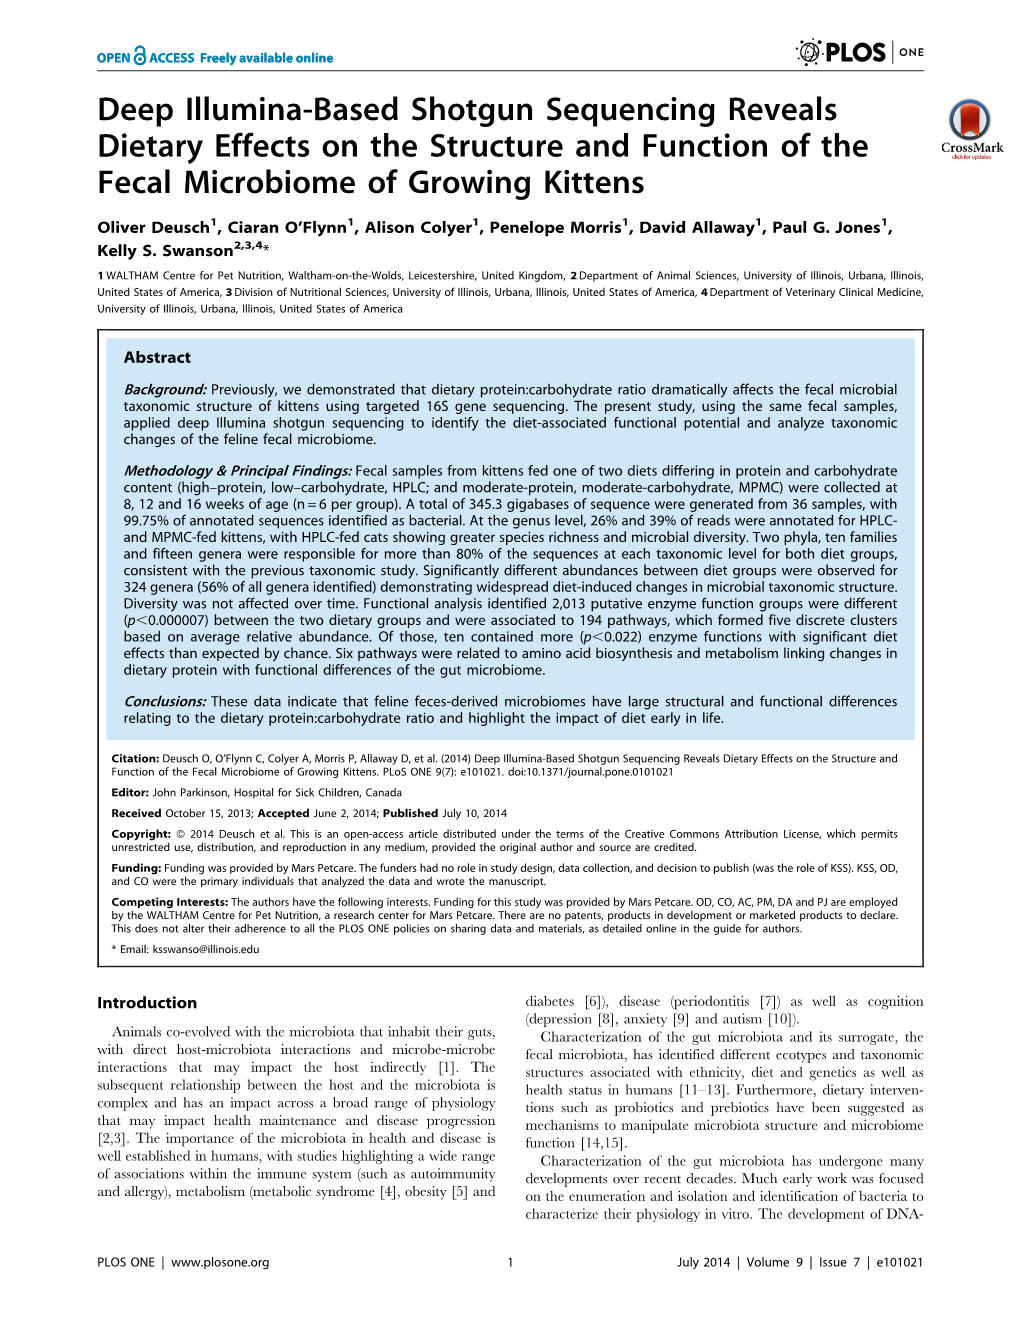 Deep Illumina-Based Shotgun Sequencing Reveals Dietary Effects on the Structure and Function of the Fecal Microbiome of Growing Kittens